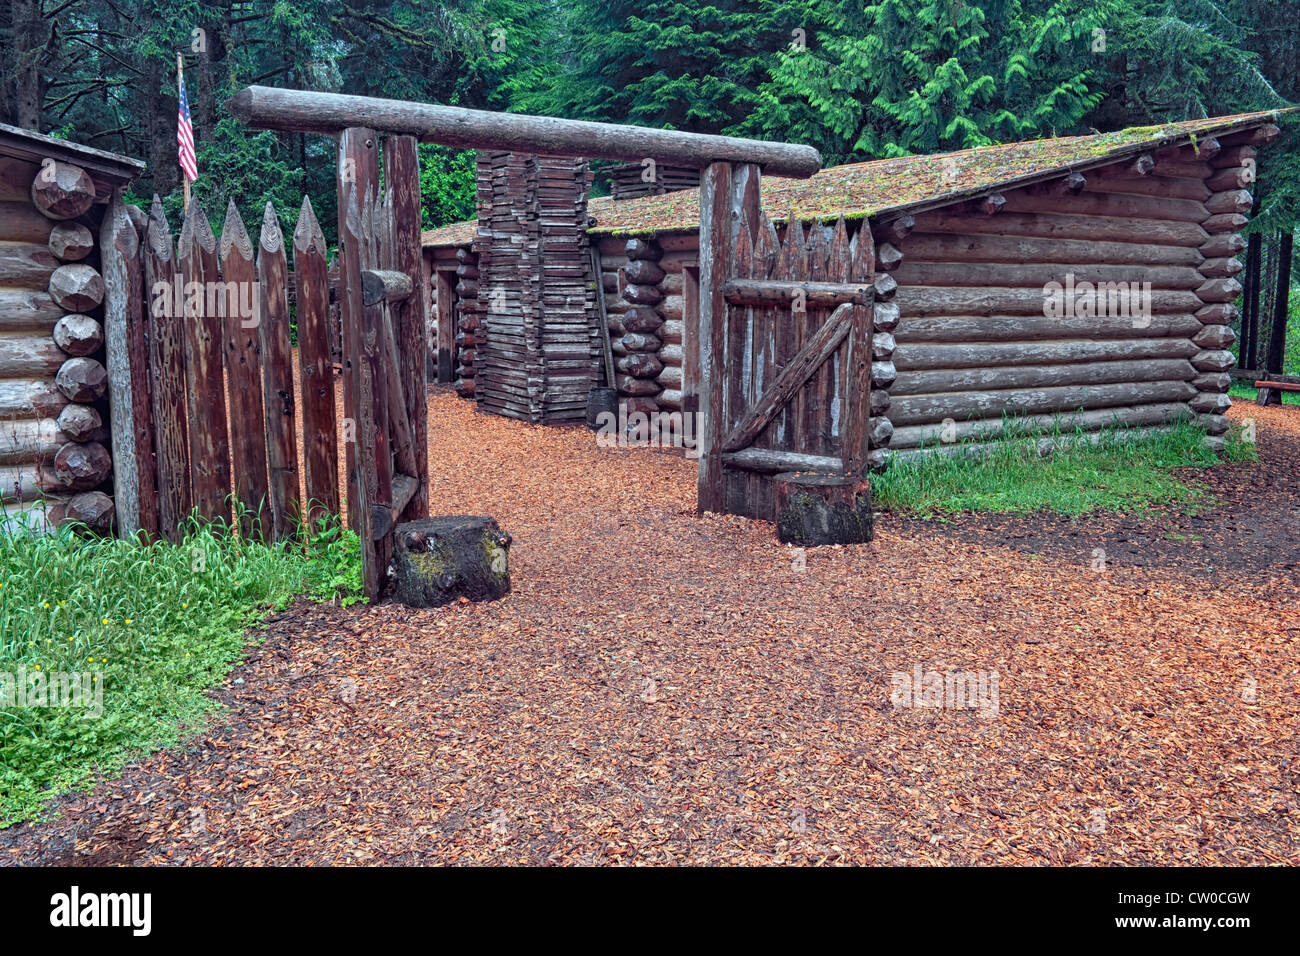 Fort Clatsop National Memorial near Astoria, Oregon, is the reconstructed fort built by the Corps and Lewis & Clark in 1805. Stock Photo